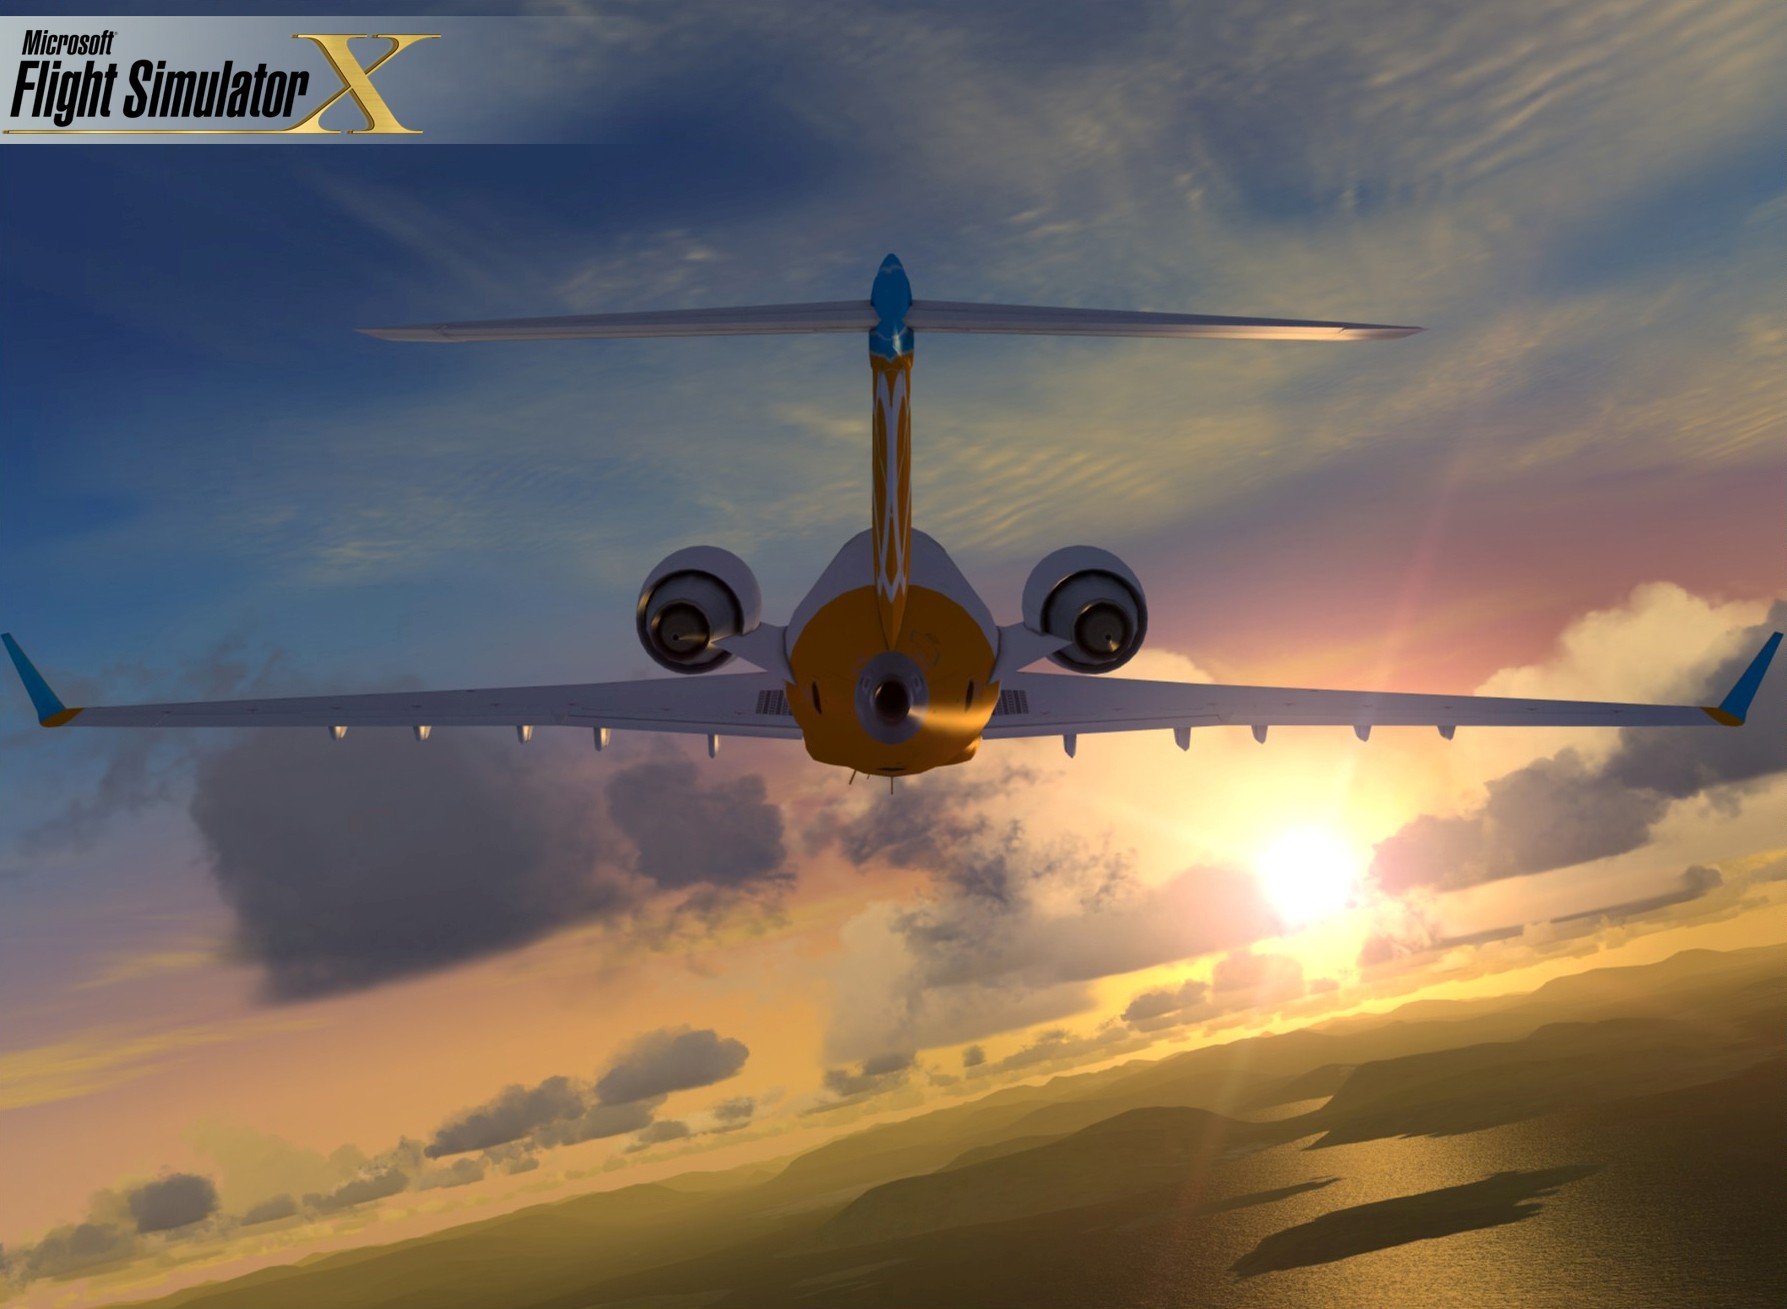 Fsx gold edition download full version free